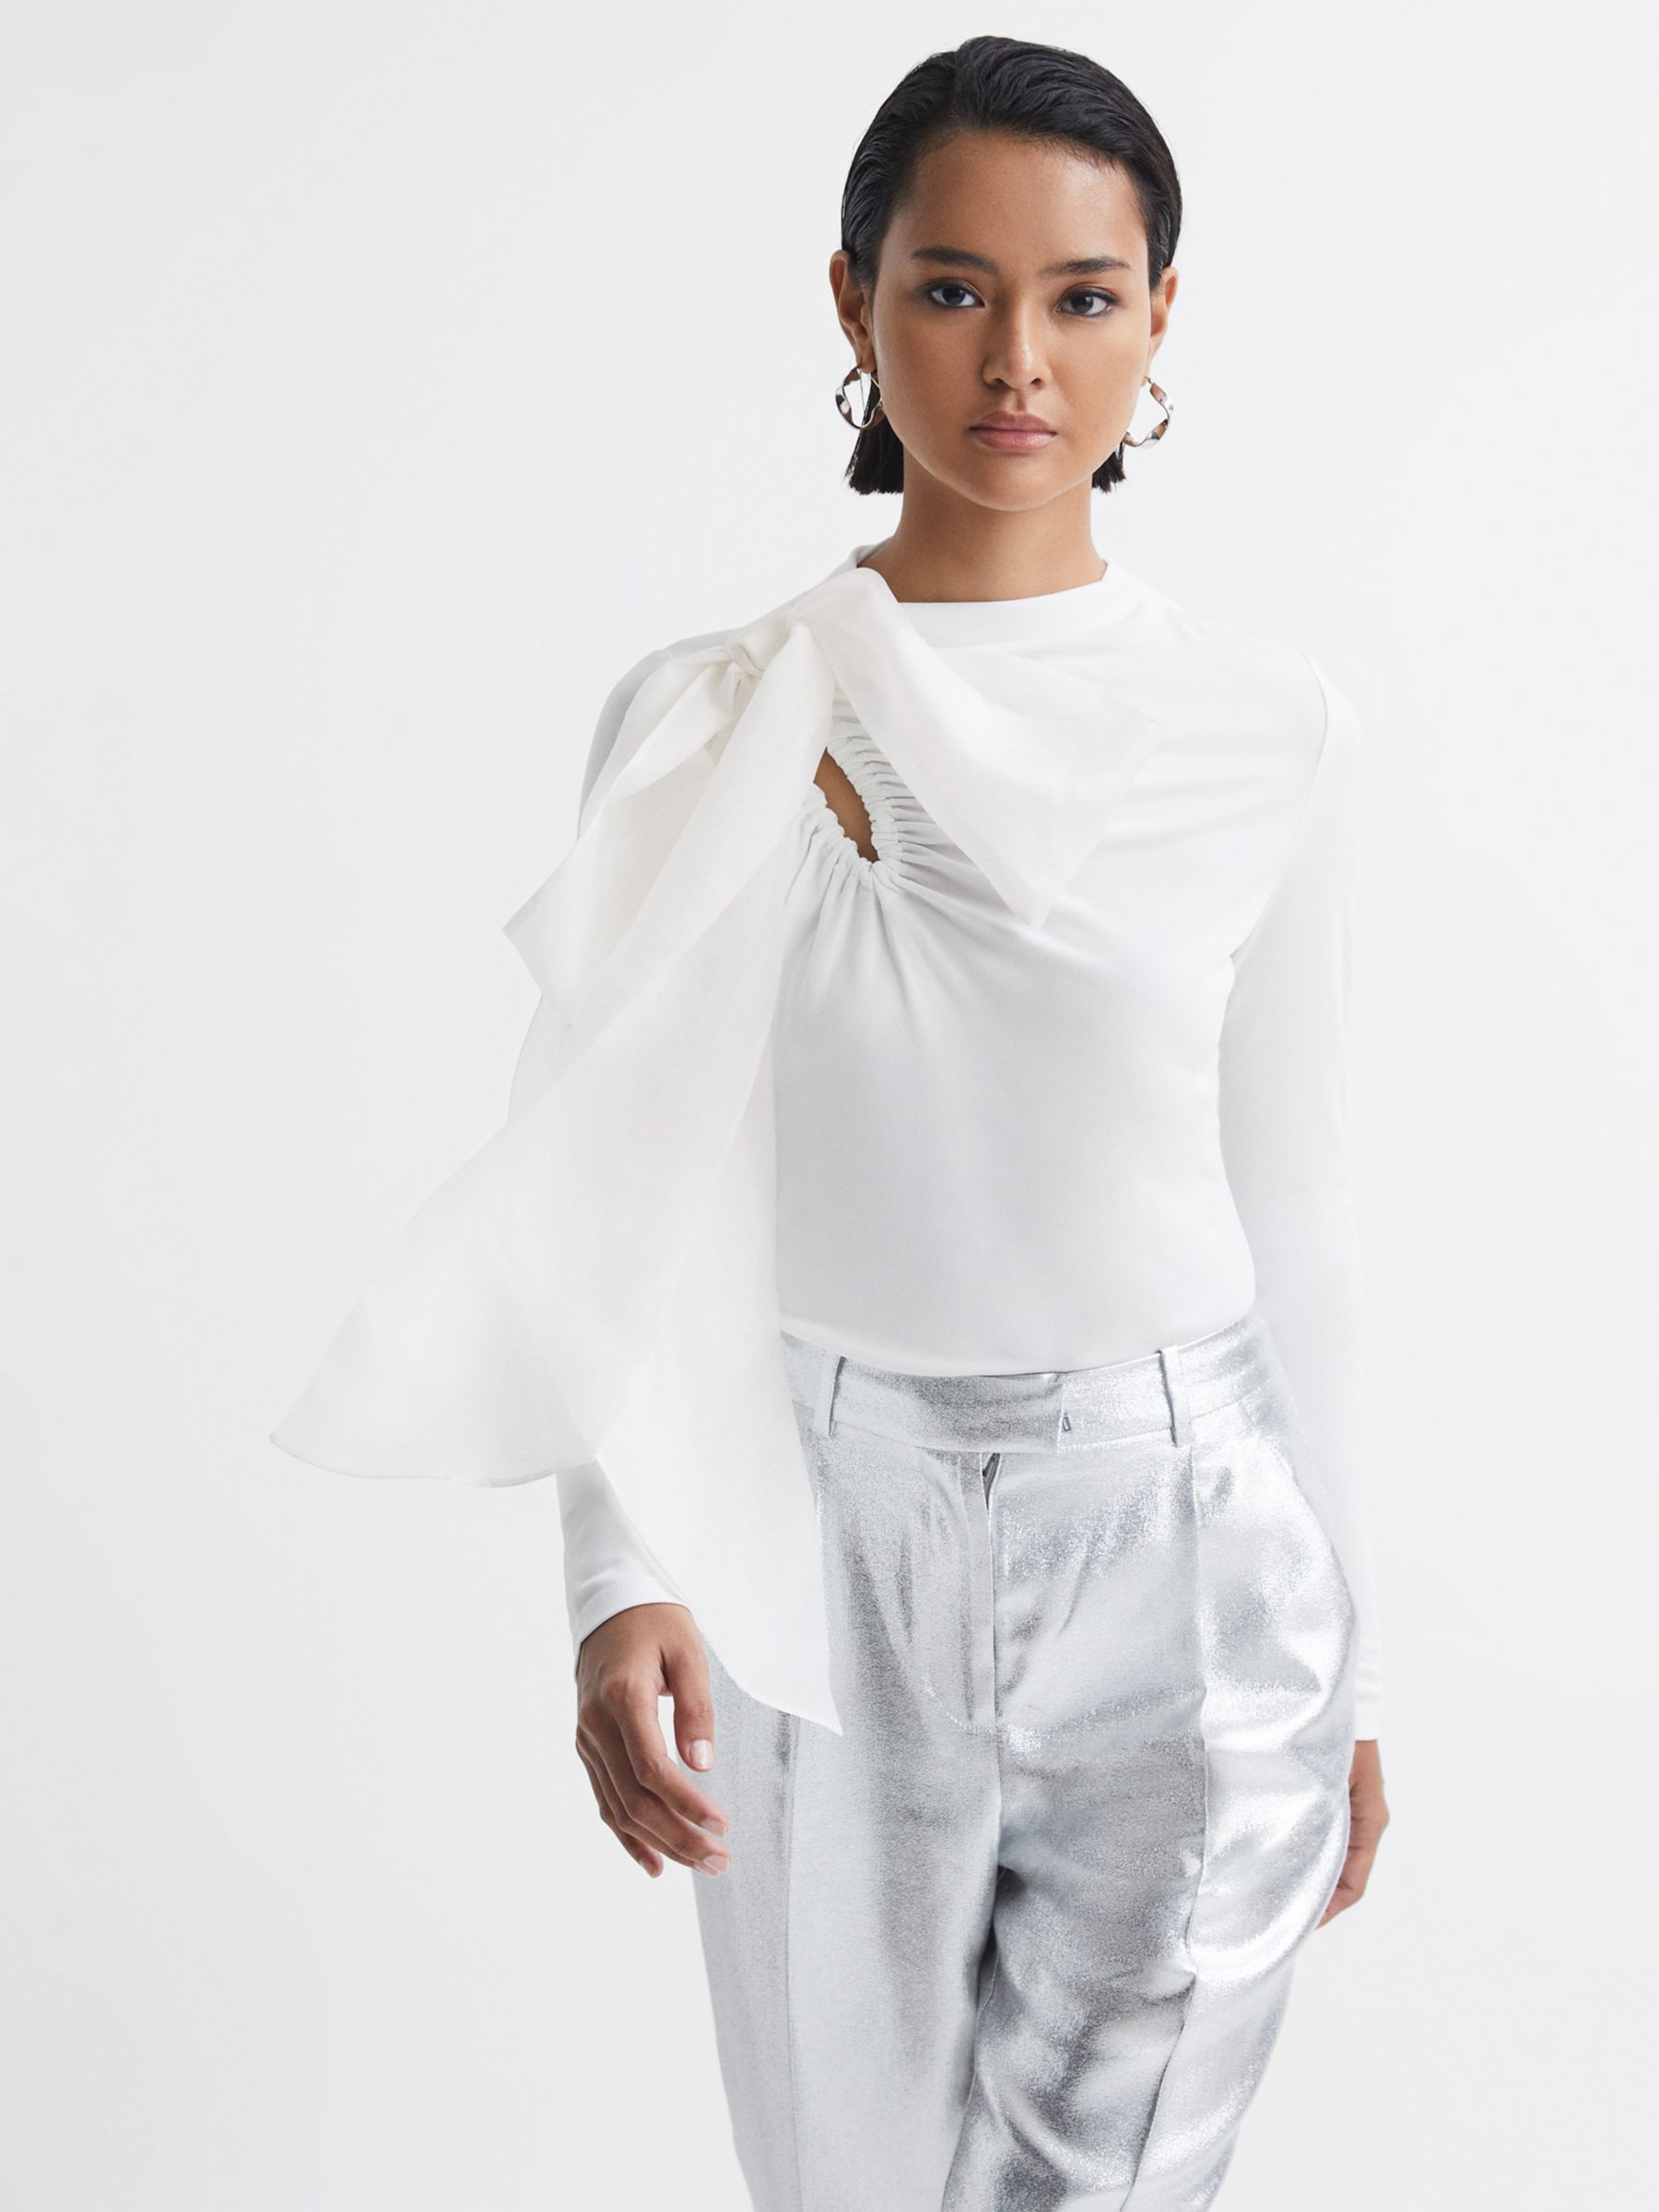 Reiss Mabel Bow Detail Long Sleeve Top, White £168.00